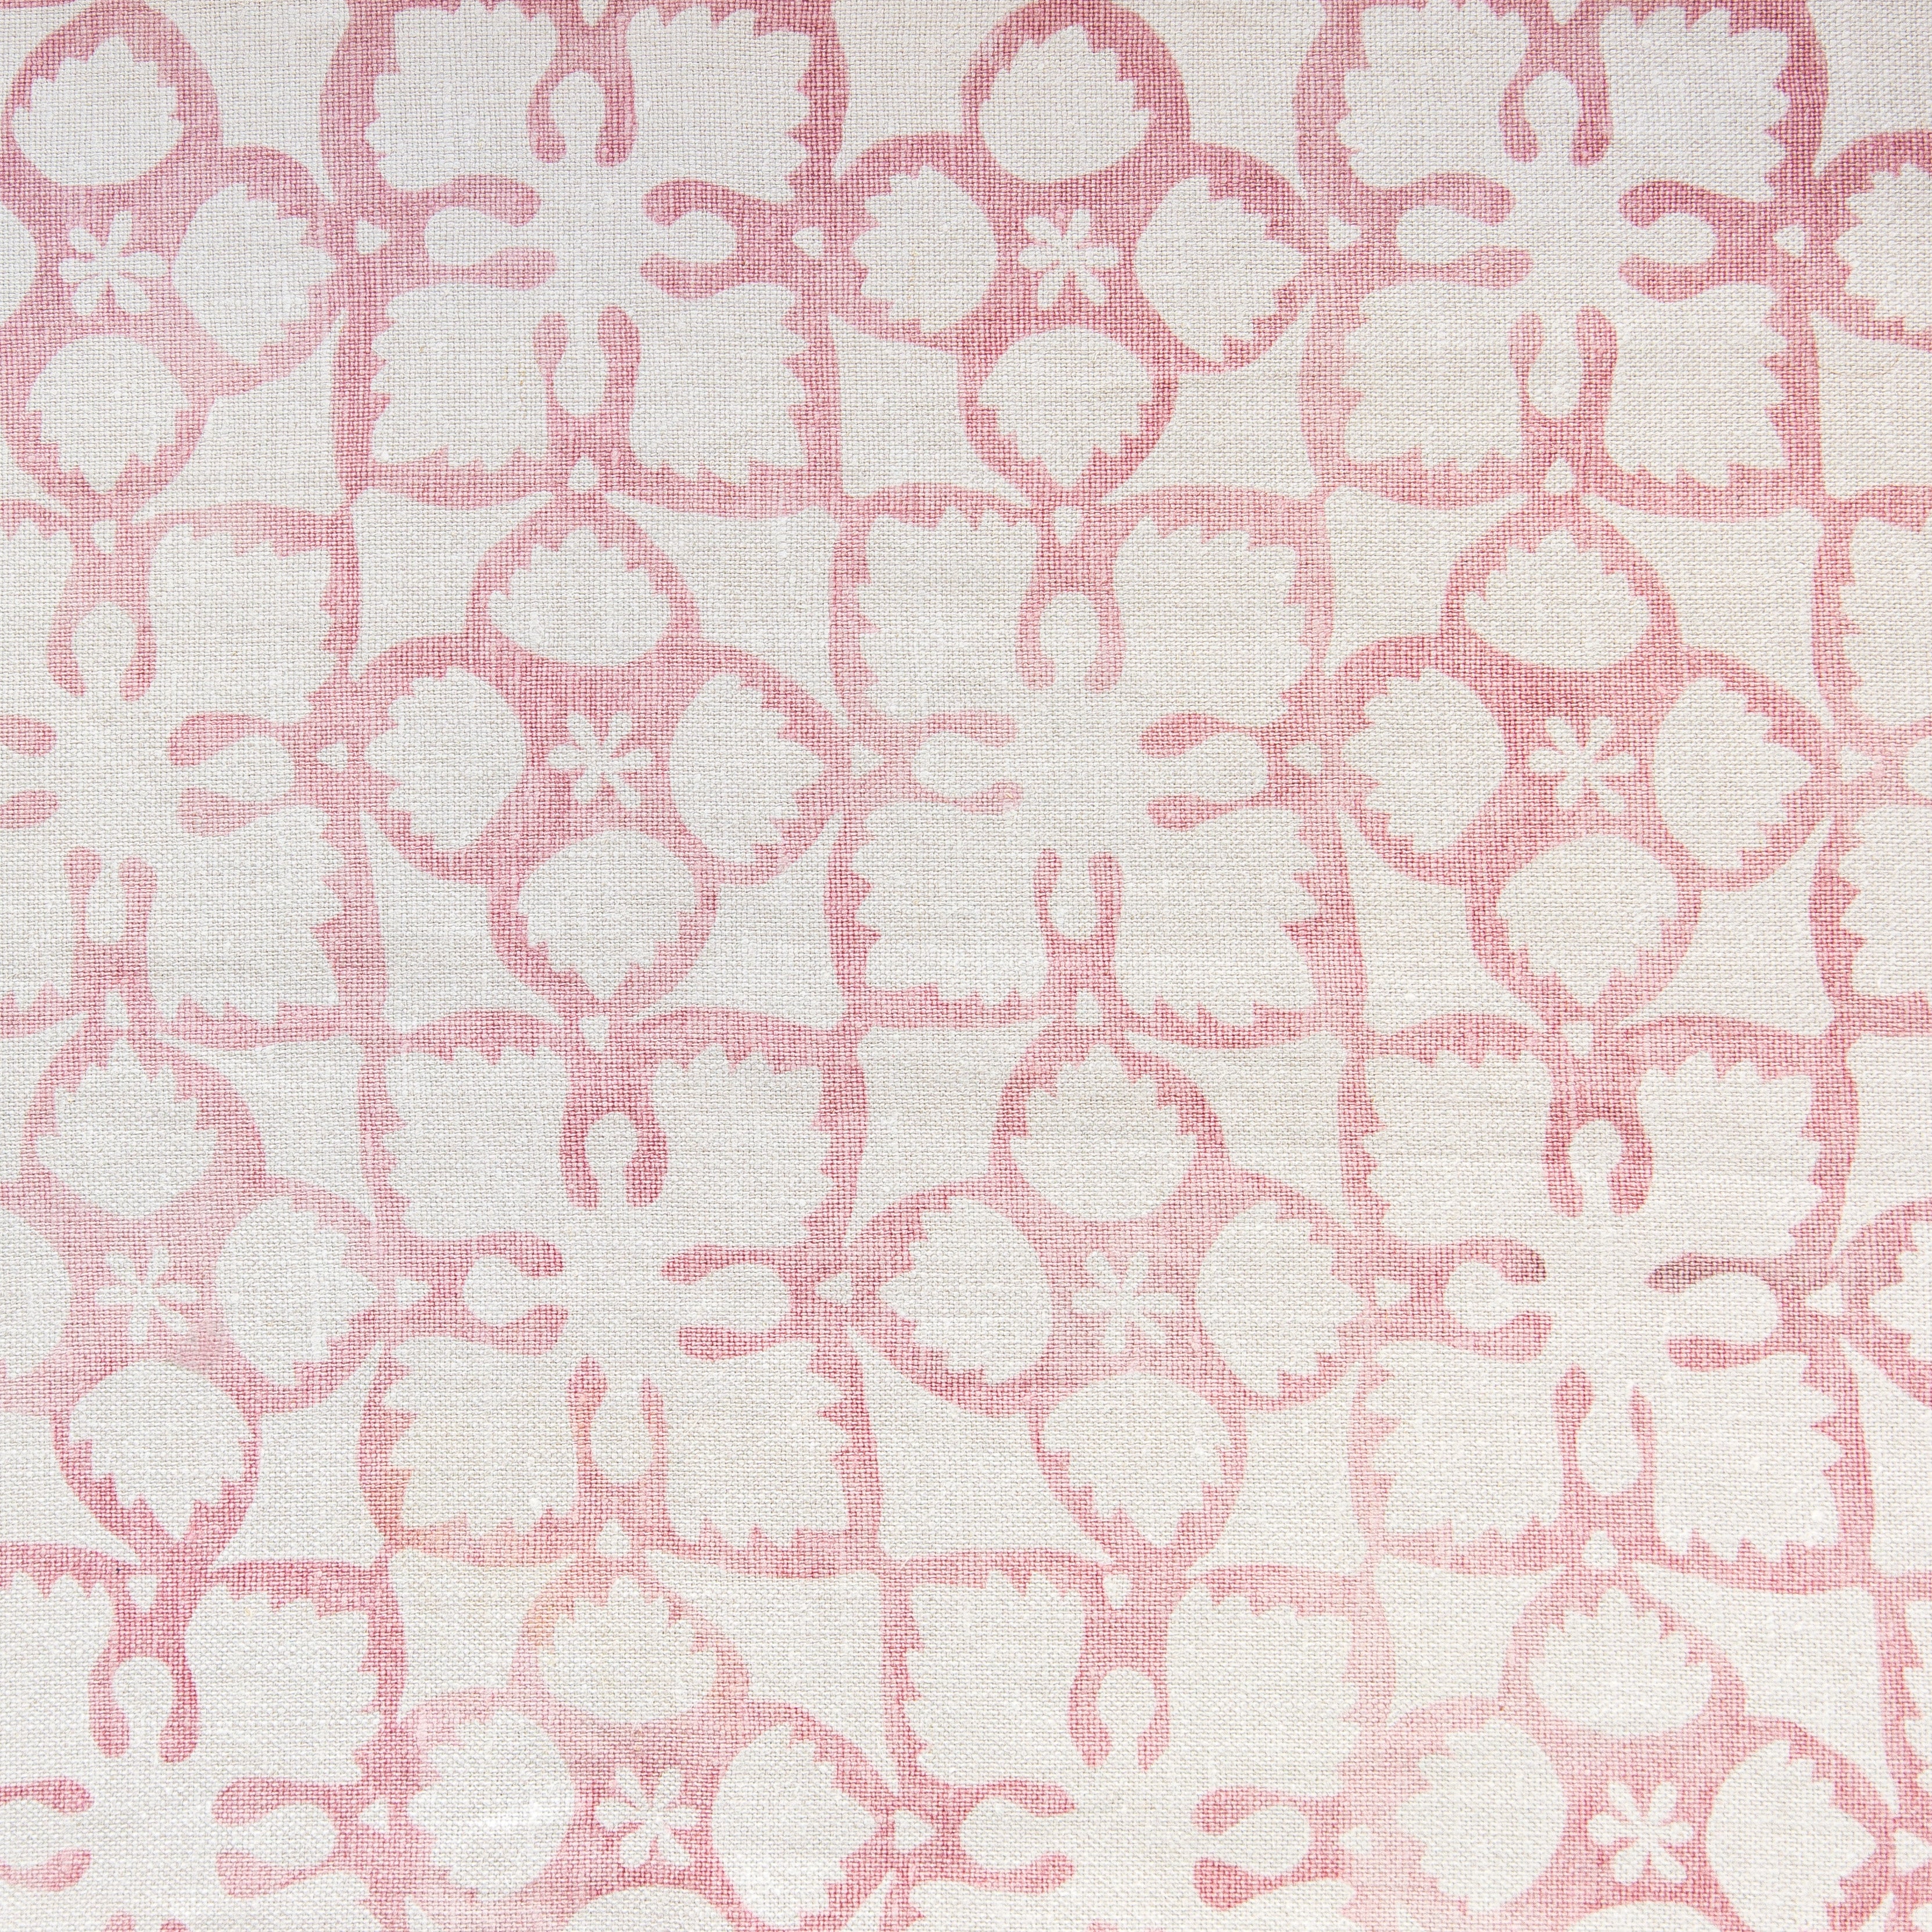 Detail of fabric in a botanical lattice print in pink on a cream field.